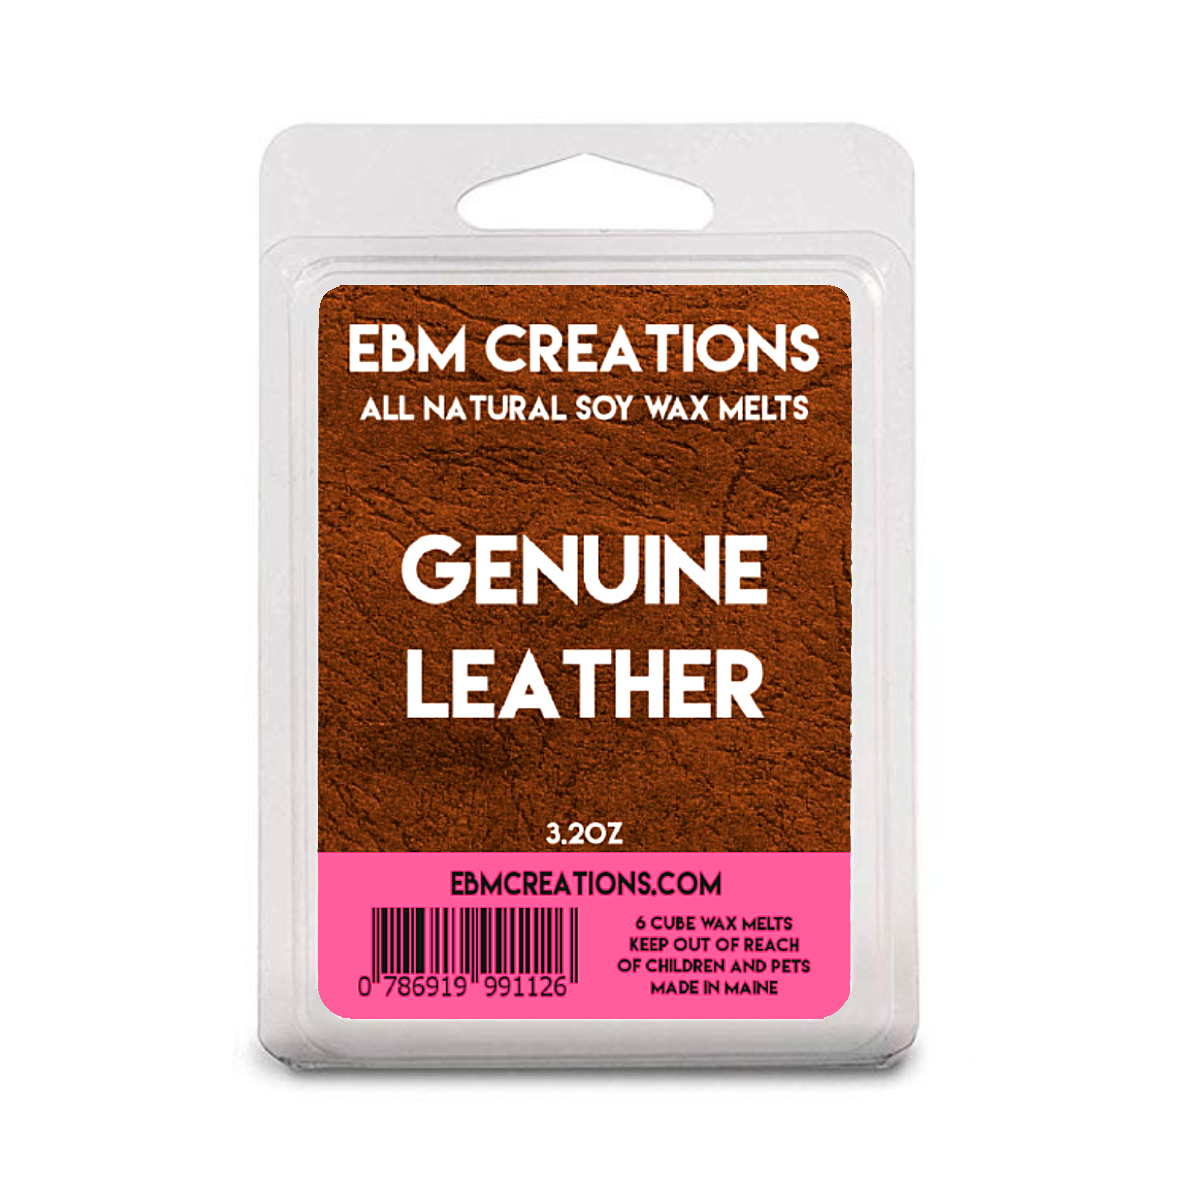 Genuine Leather - 3.2 oz Clamshell